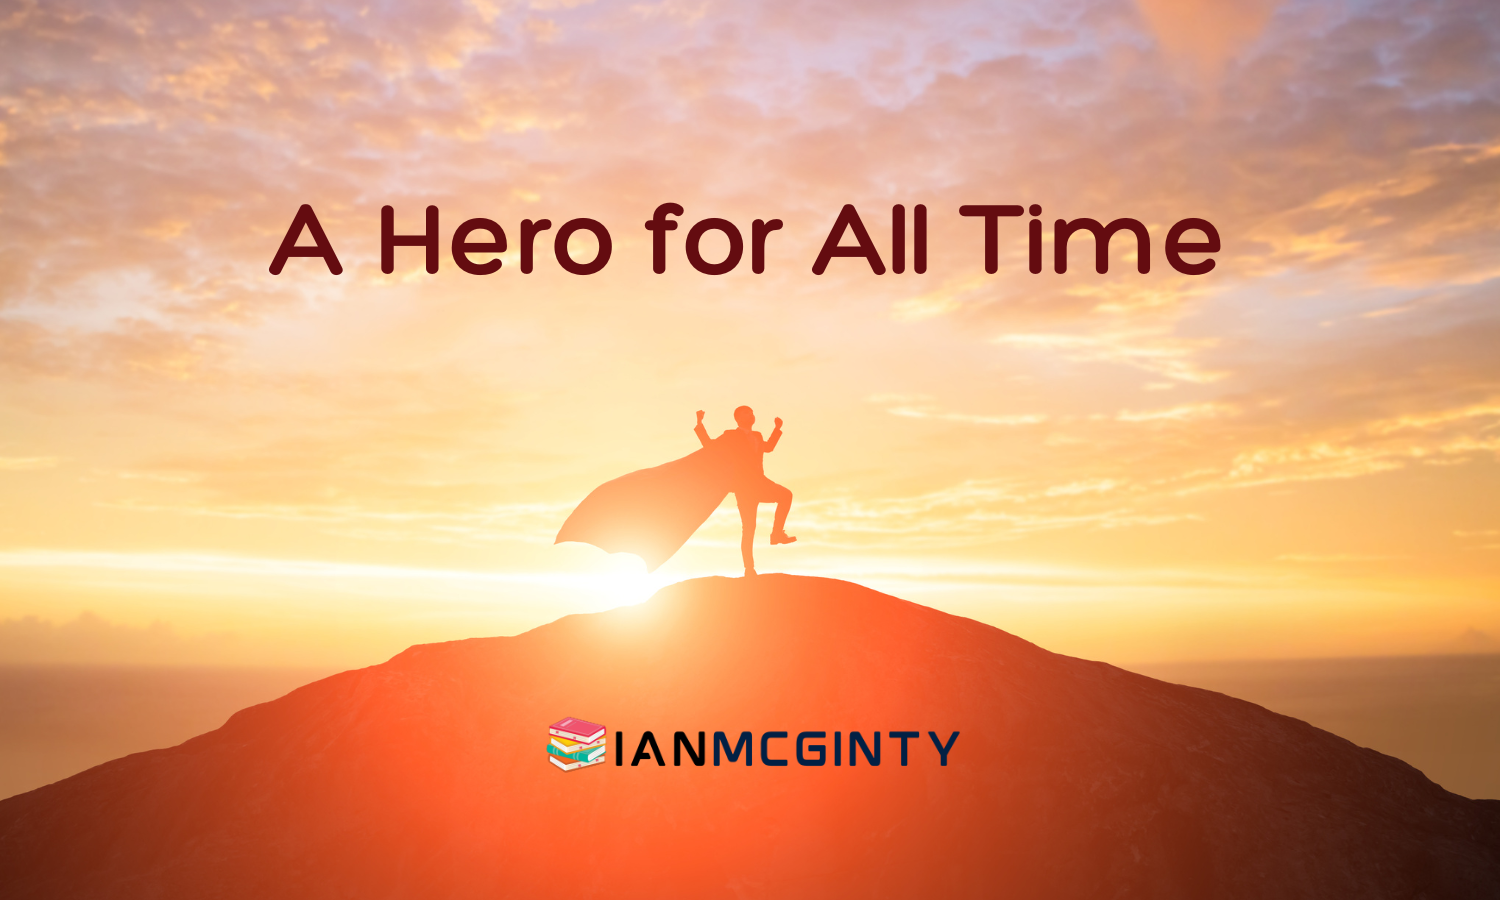 Superman - A Hero for All Time